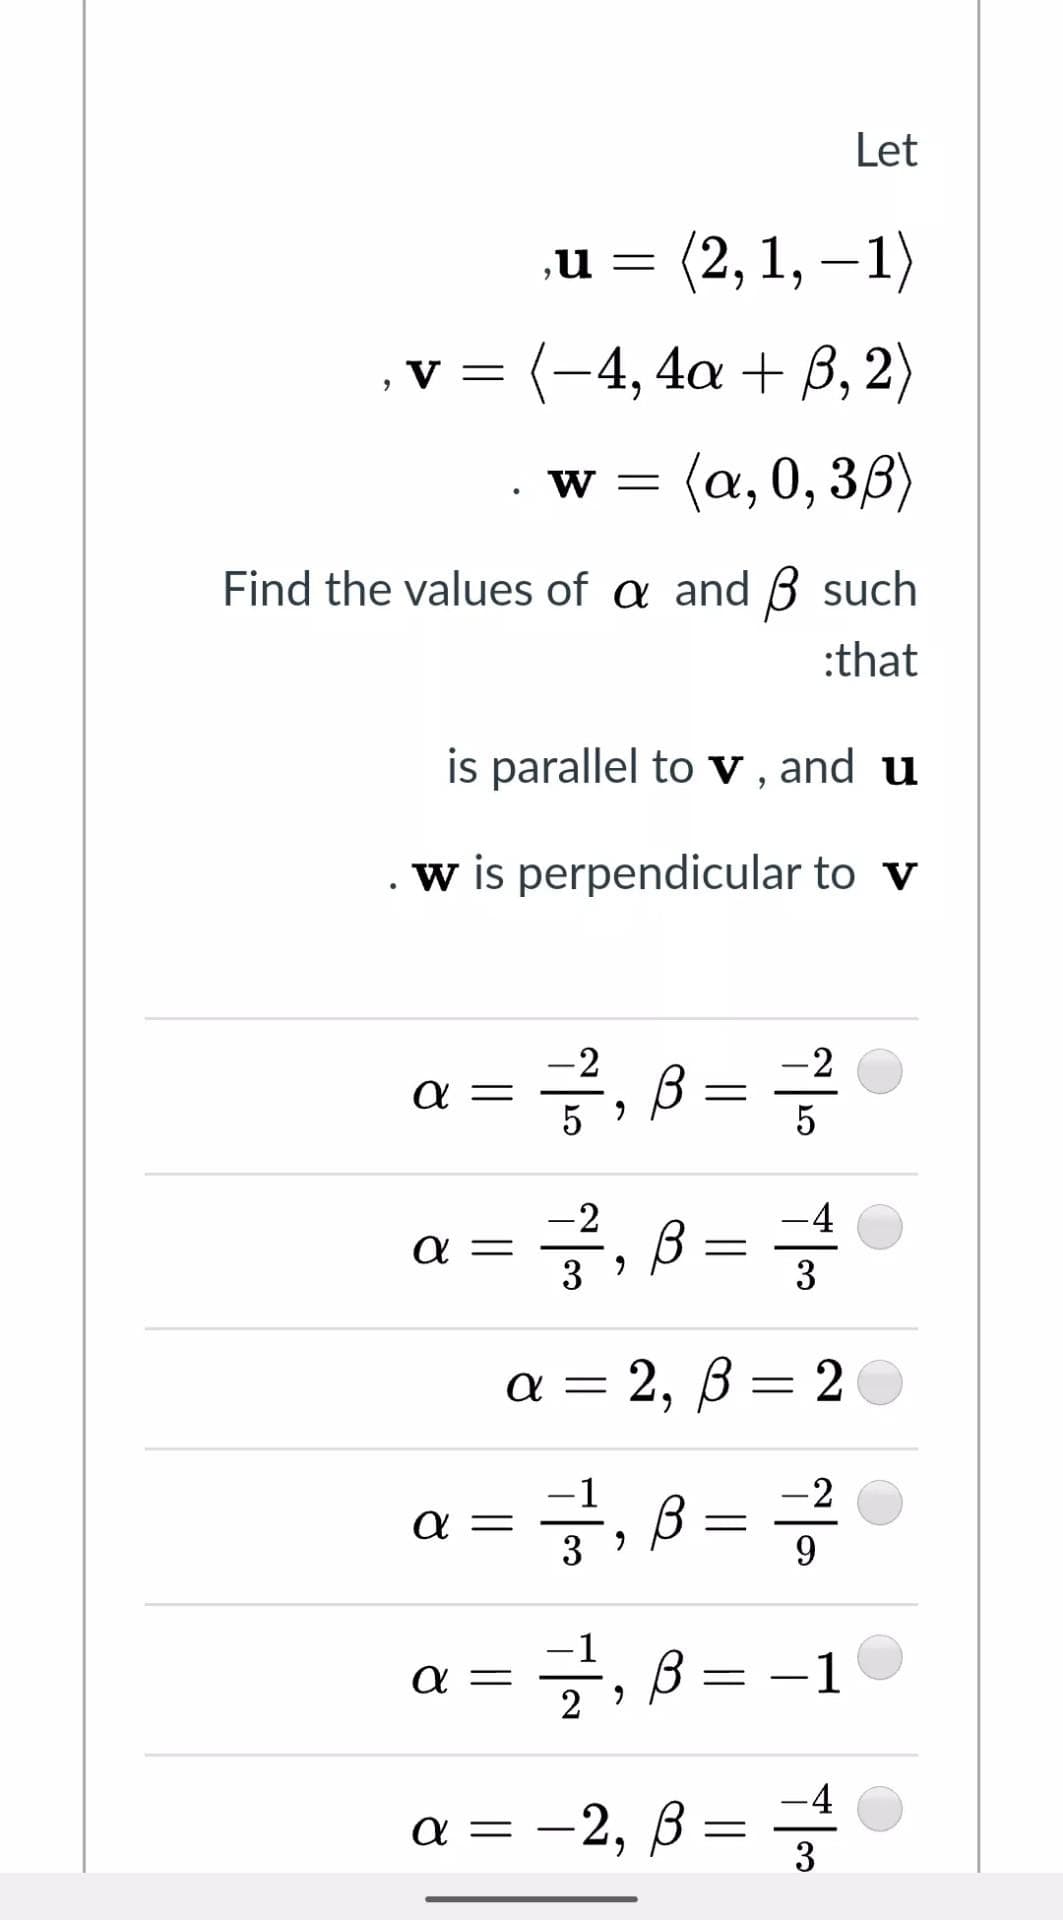 Let
(2, 1, – 1)
,u
,v = (-4, 4a + B, 2)
(a, 0, 3,8)
W =
Find the values of a and ß such
:that
is parallel to v , and u
w is perpendicular to v
-2
a =
5
글,
-2
·글, B= 글
-2
-4
a =
3
%3D
%3D
3
a = 2, ß = 2
글, B
-2
α
9.
-1
글, B =
α
-1
-4
a = -2, ß
3
